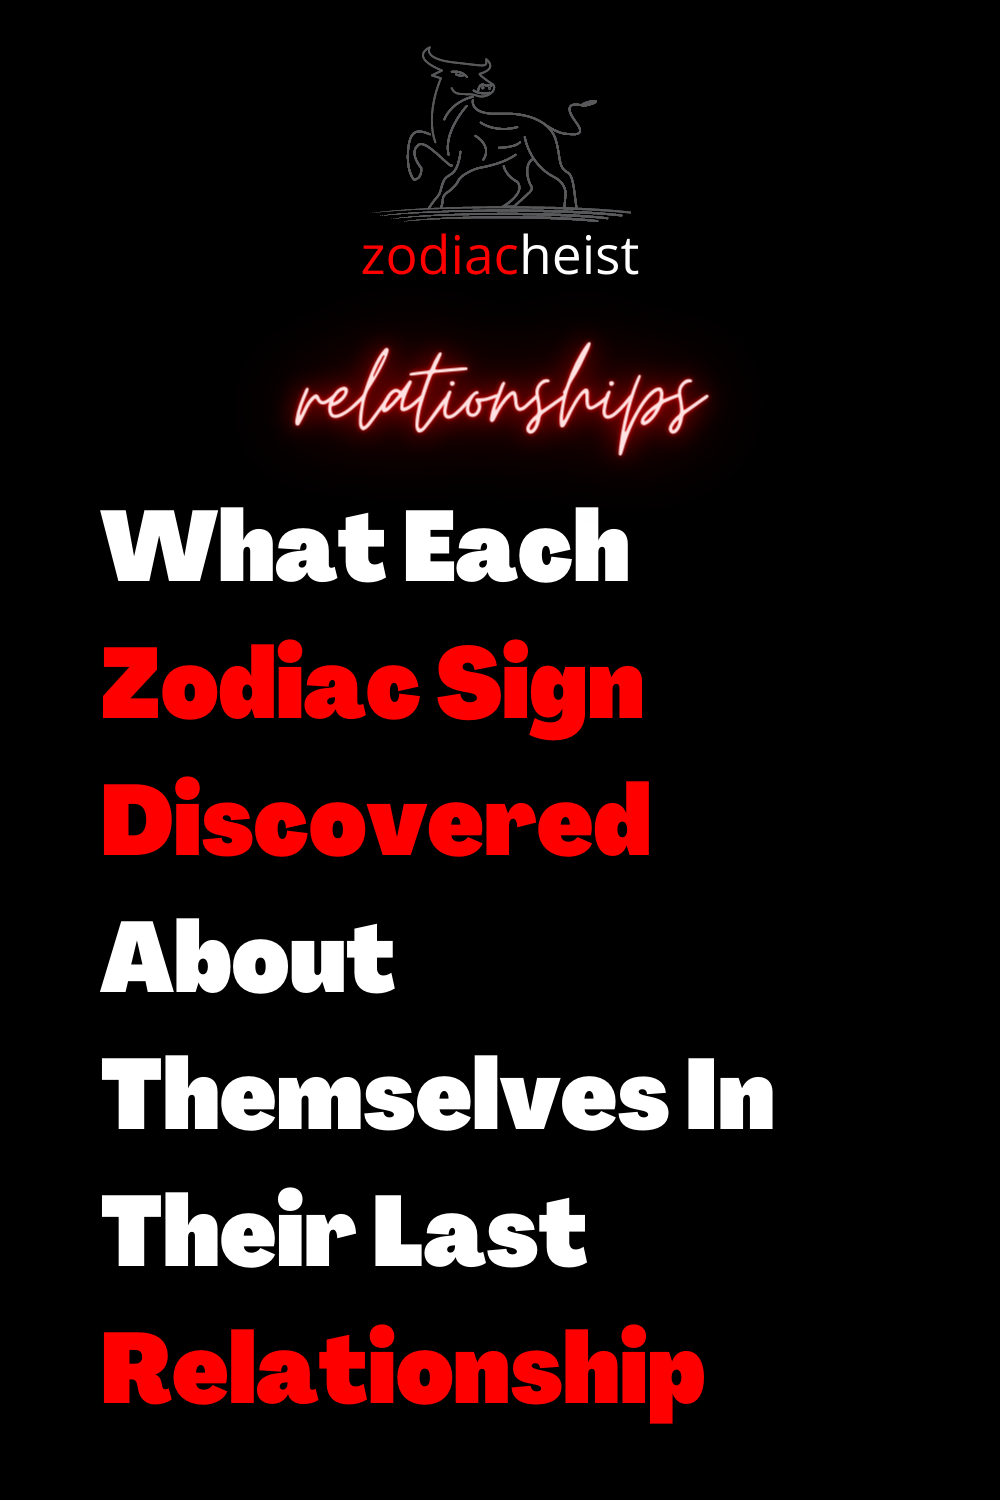 What Each Zodiac Sign Discovered About Themselves In Their Last Relationship